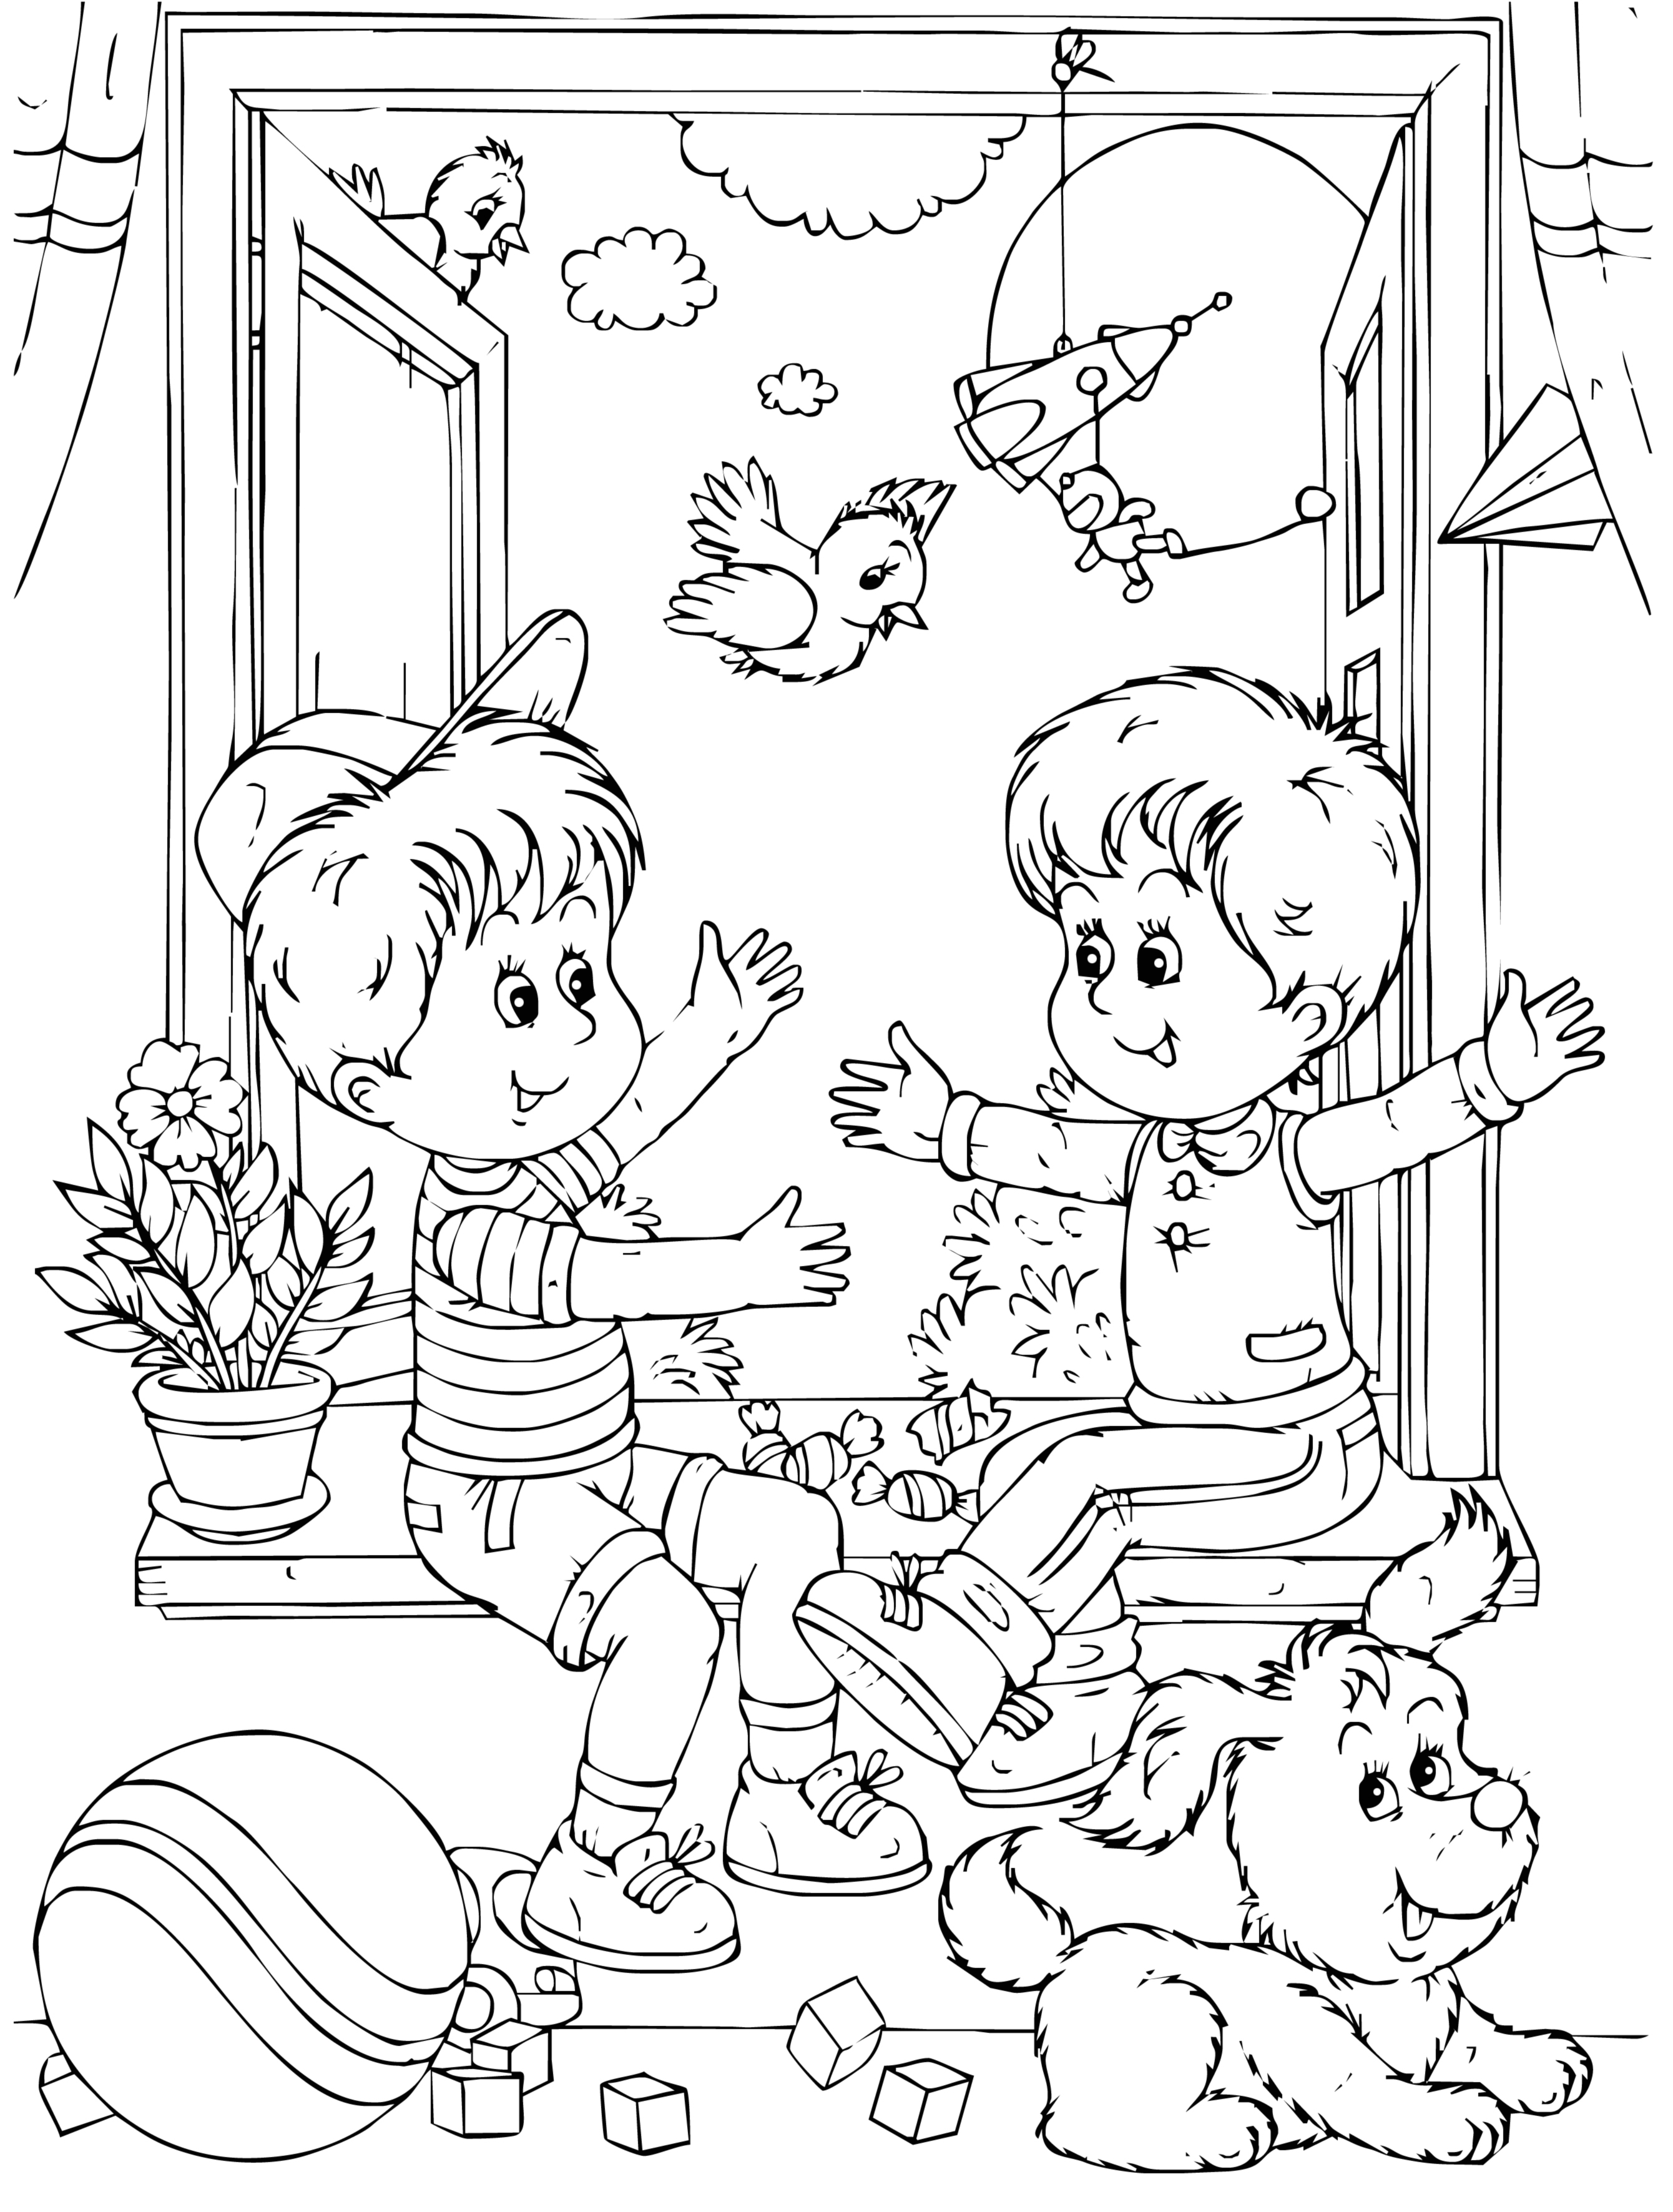 Friendship coloring pages to download and print for free